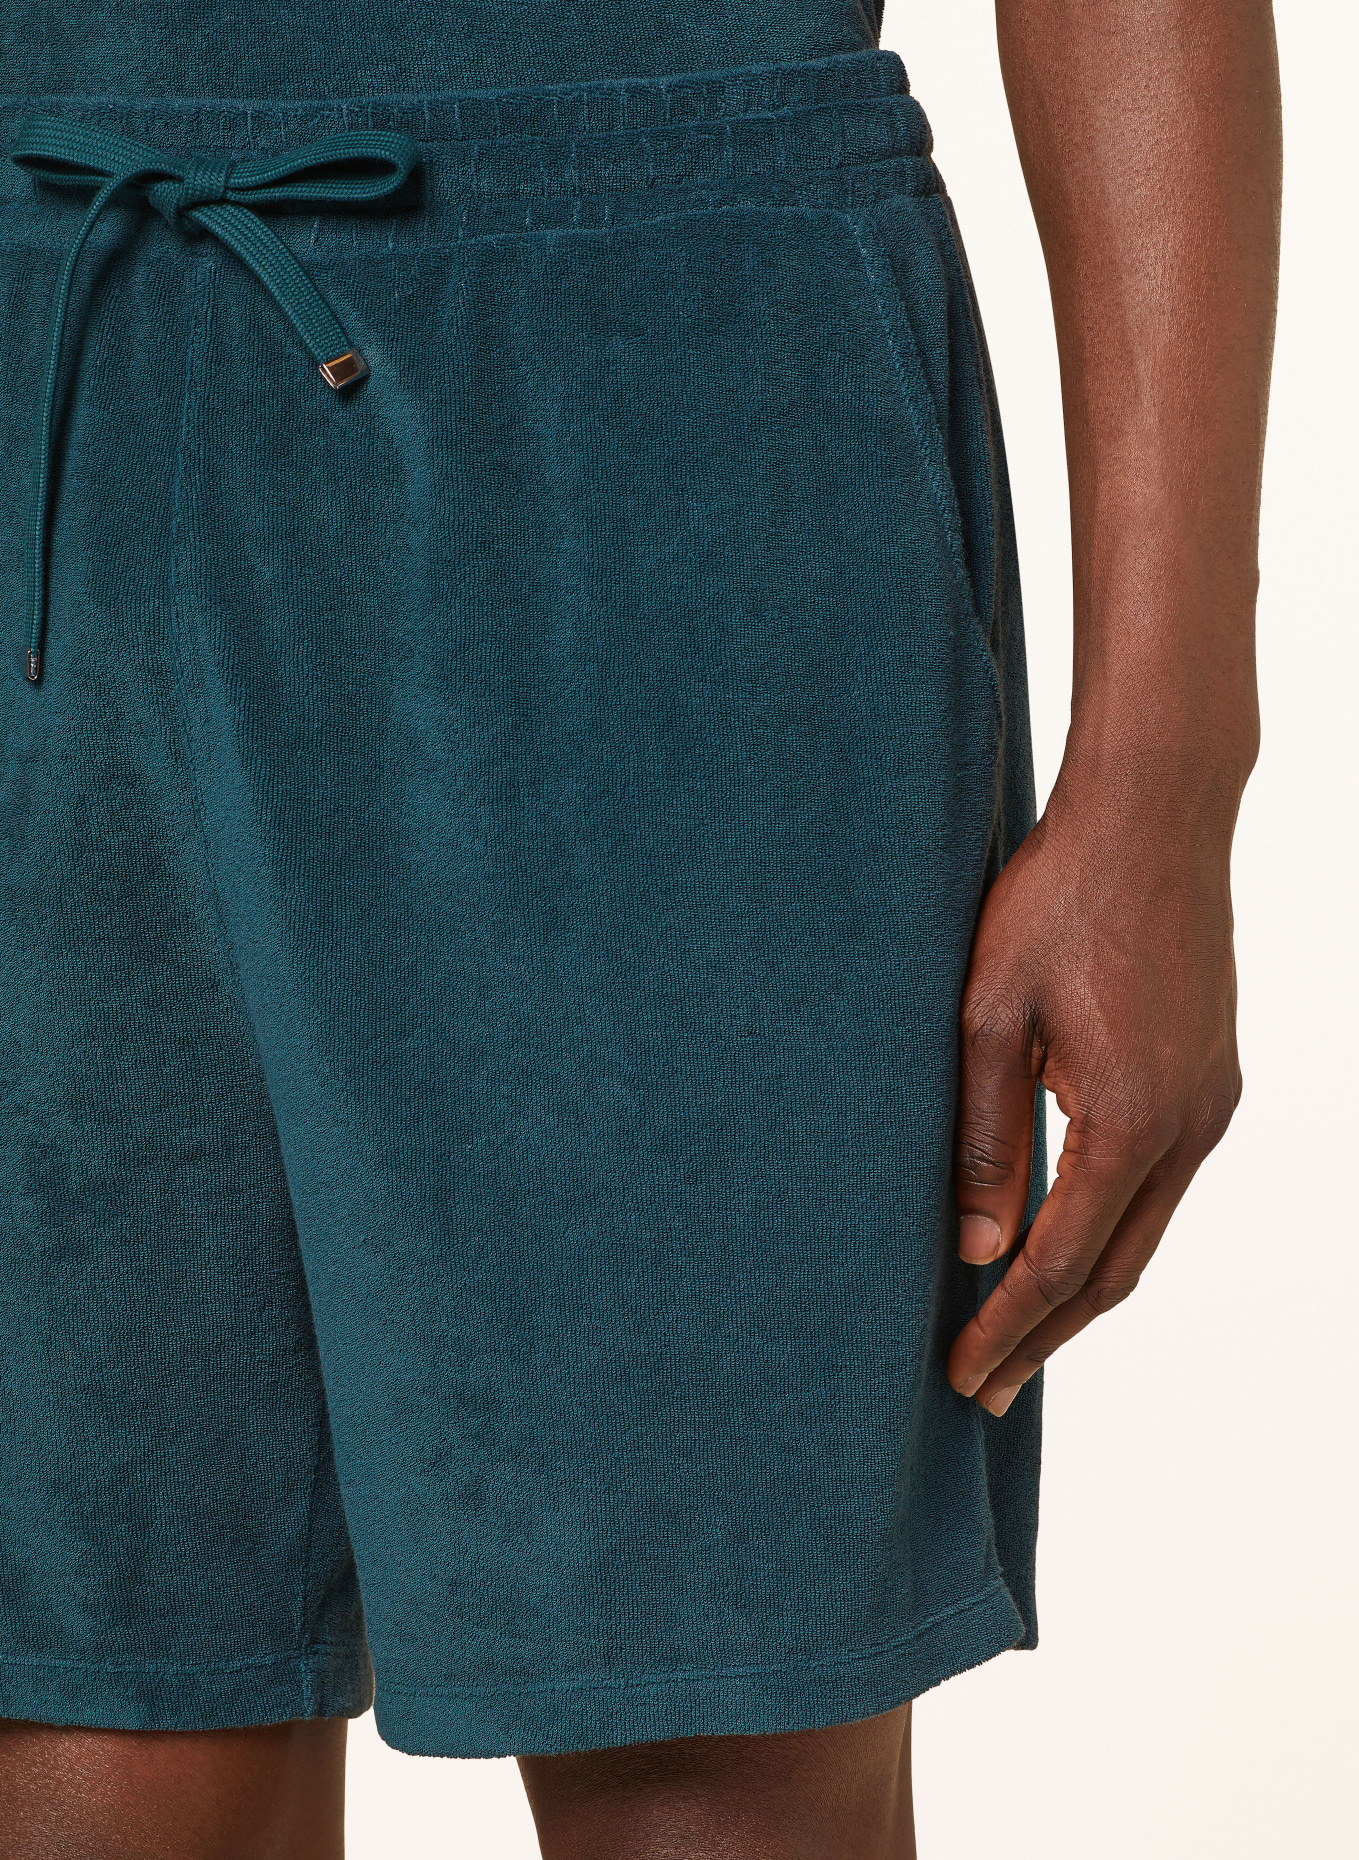 CLOSED Terry cloth shorts in jogger style, Color: TEAL (Image 5)